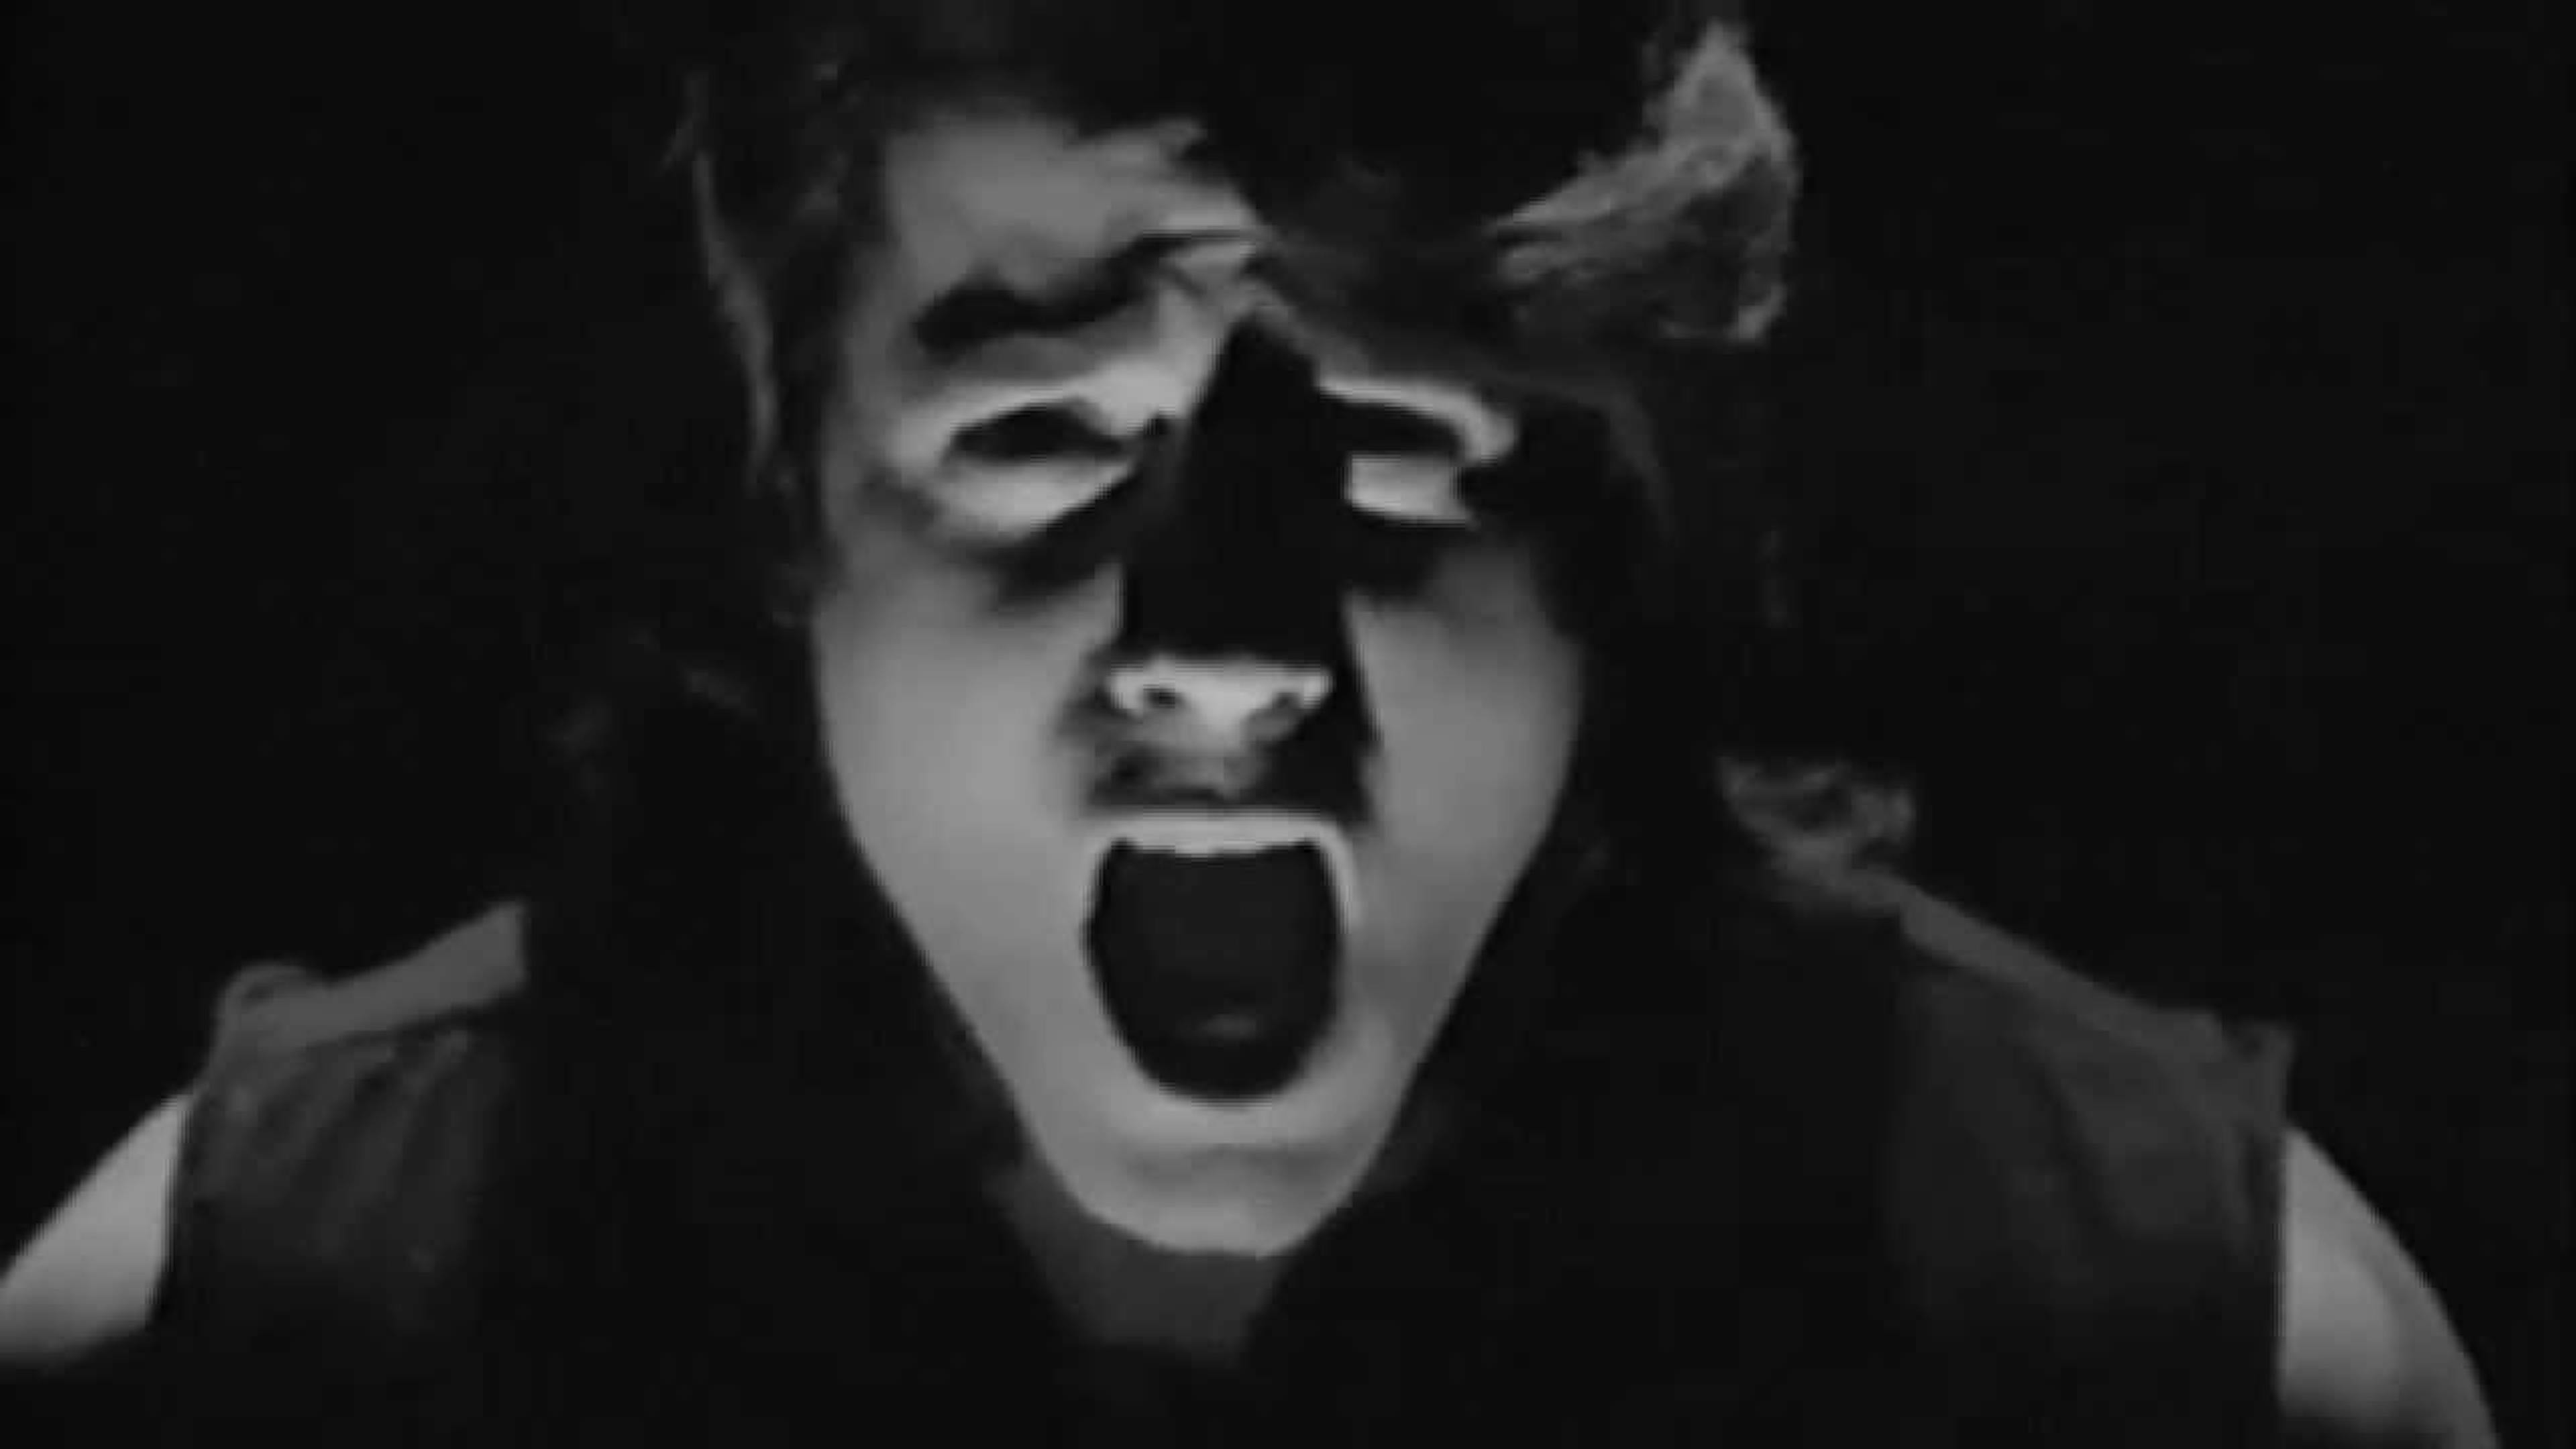 The Real Story Behind Danzig's Mother Music Video